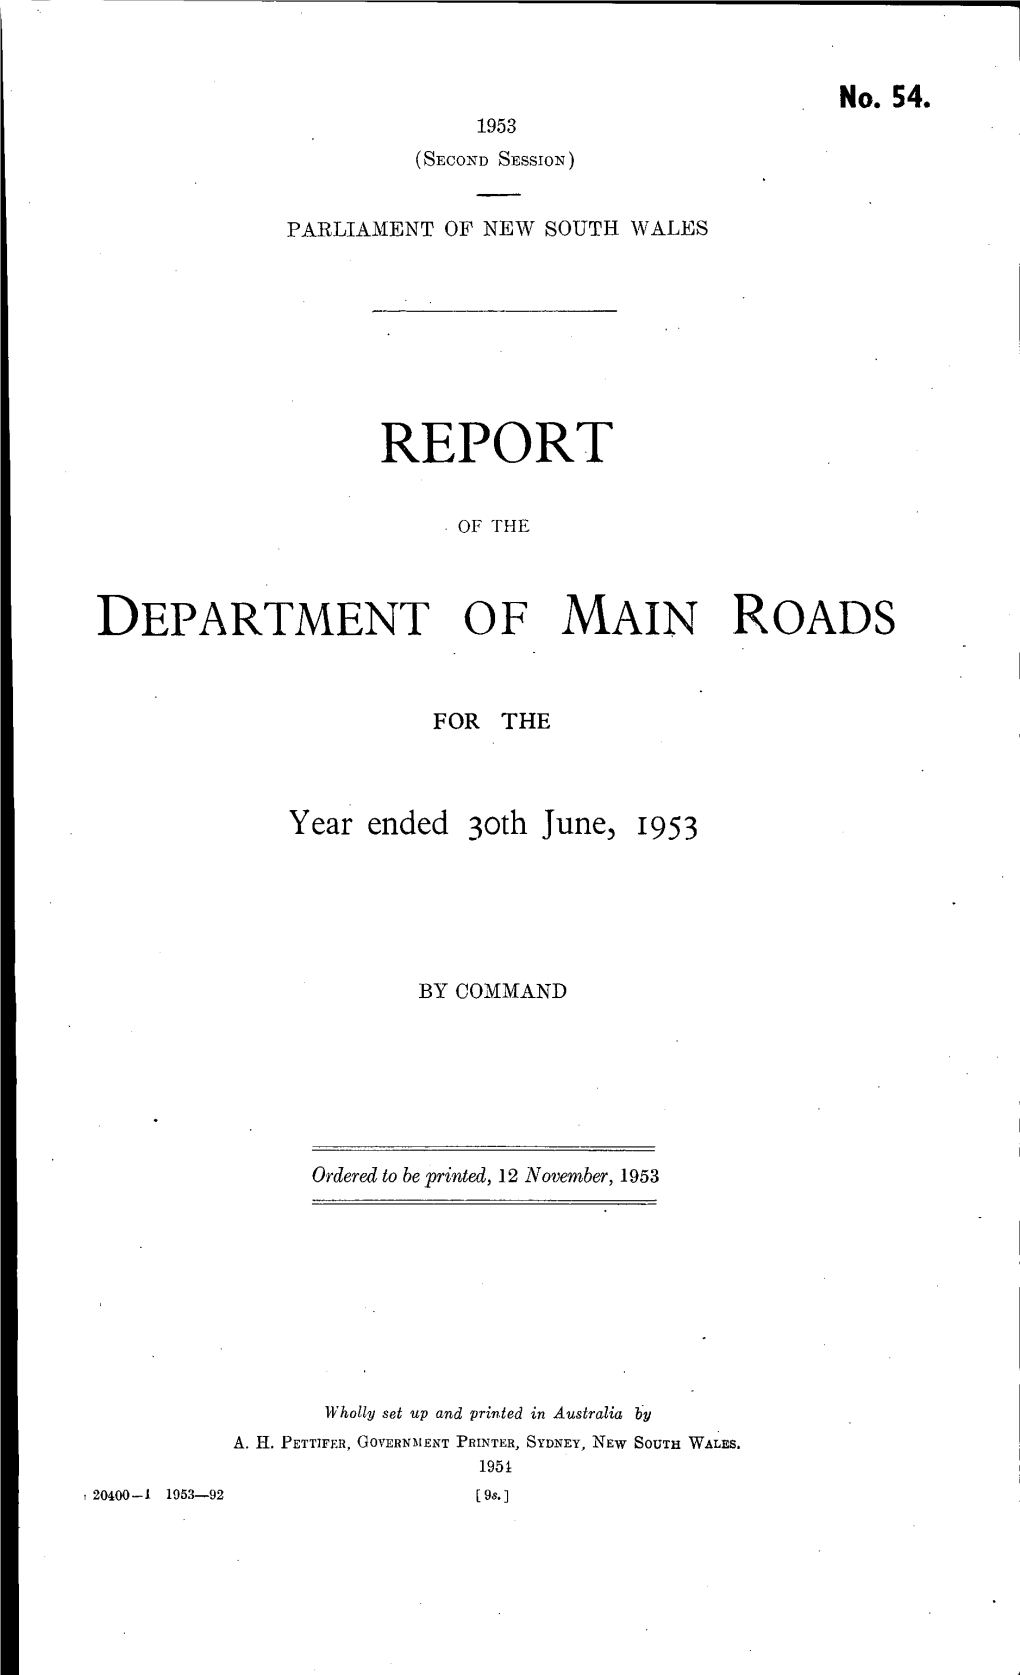 Department of Main Roads New South Wales, 1952-53